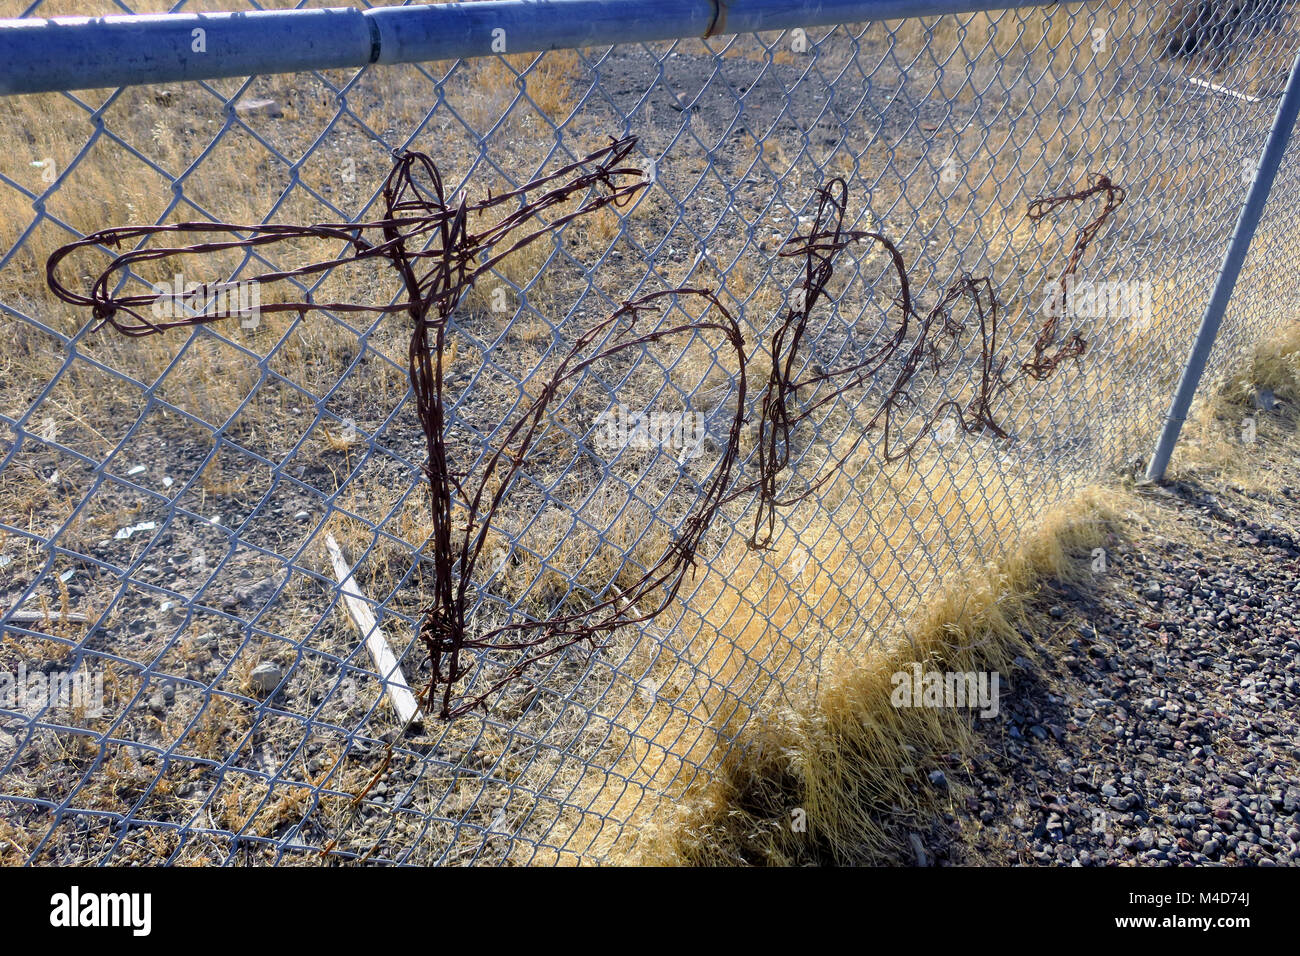 Topaz interment camp illustrated by wire on a fence near a monument in Central Utah. Stock Photo